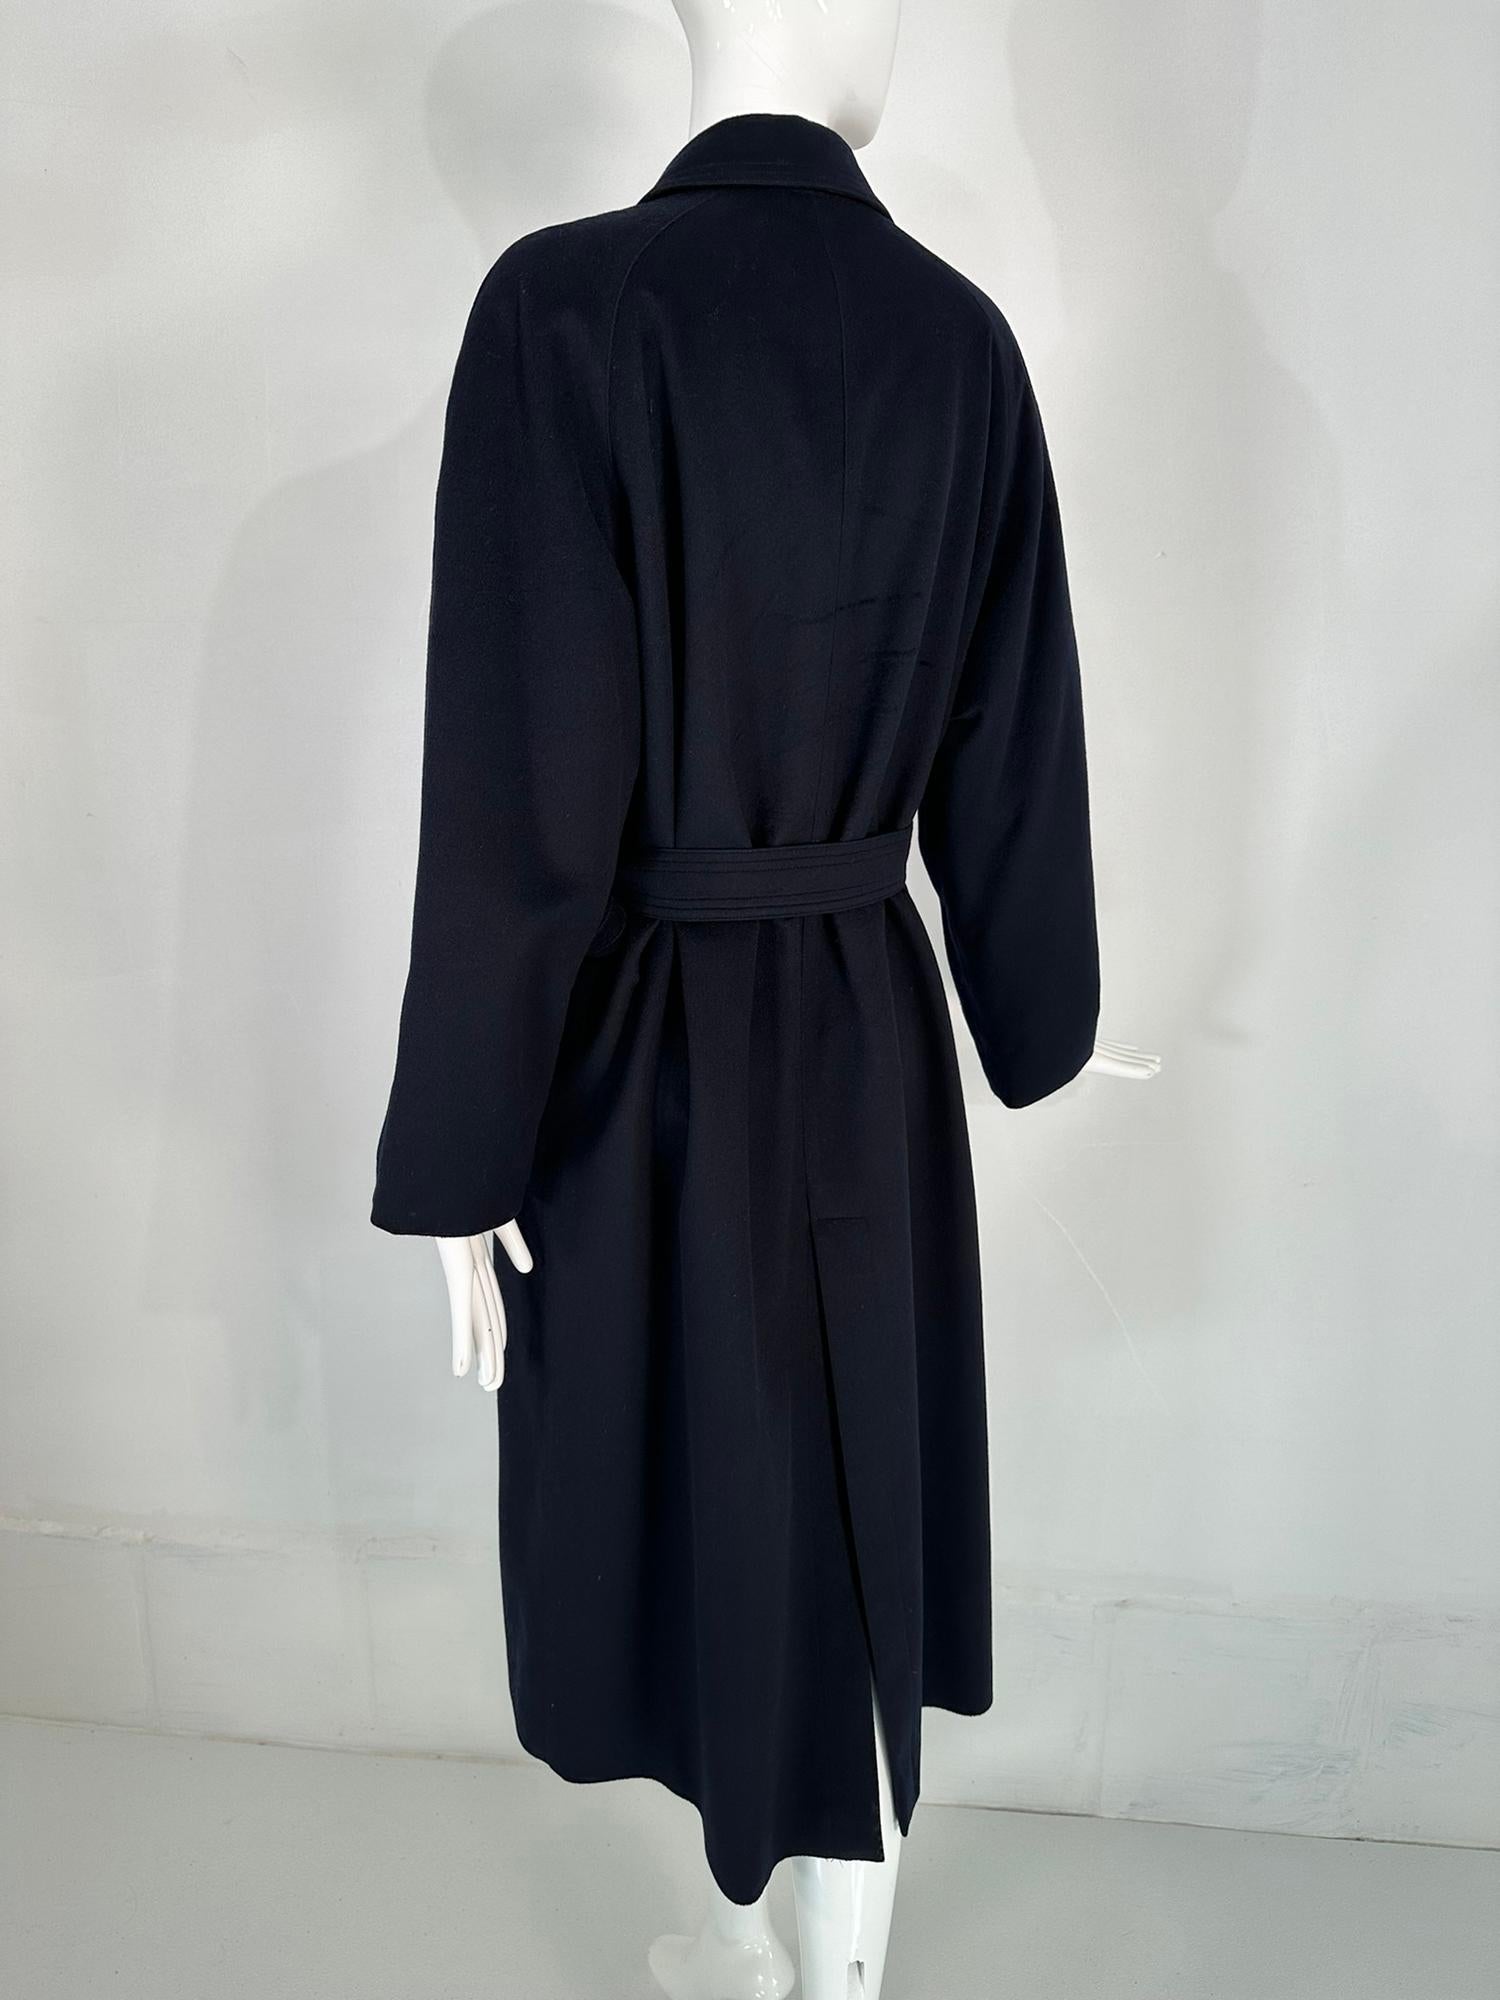 Giorgio Armani Classico Navy Blue Cashmere Raglan Sleeve Belted Over Coat  For Sale 5